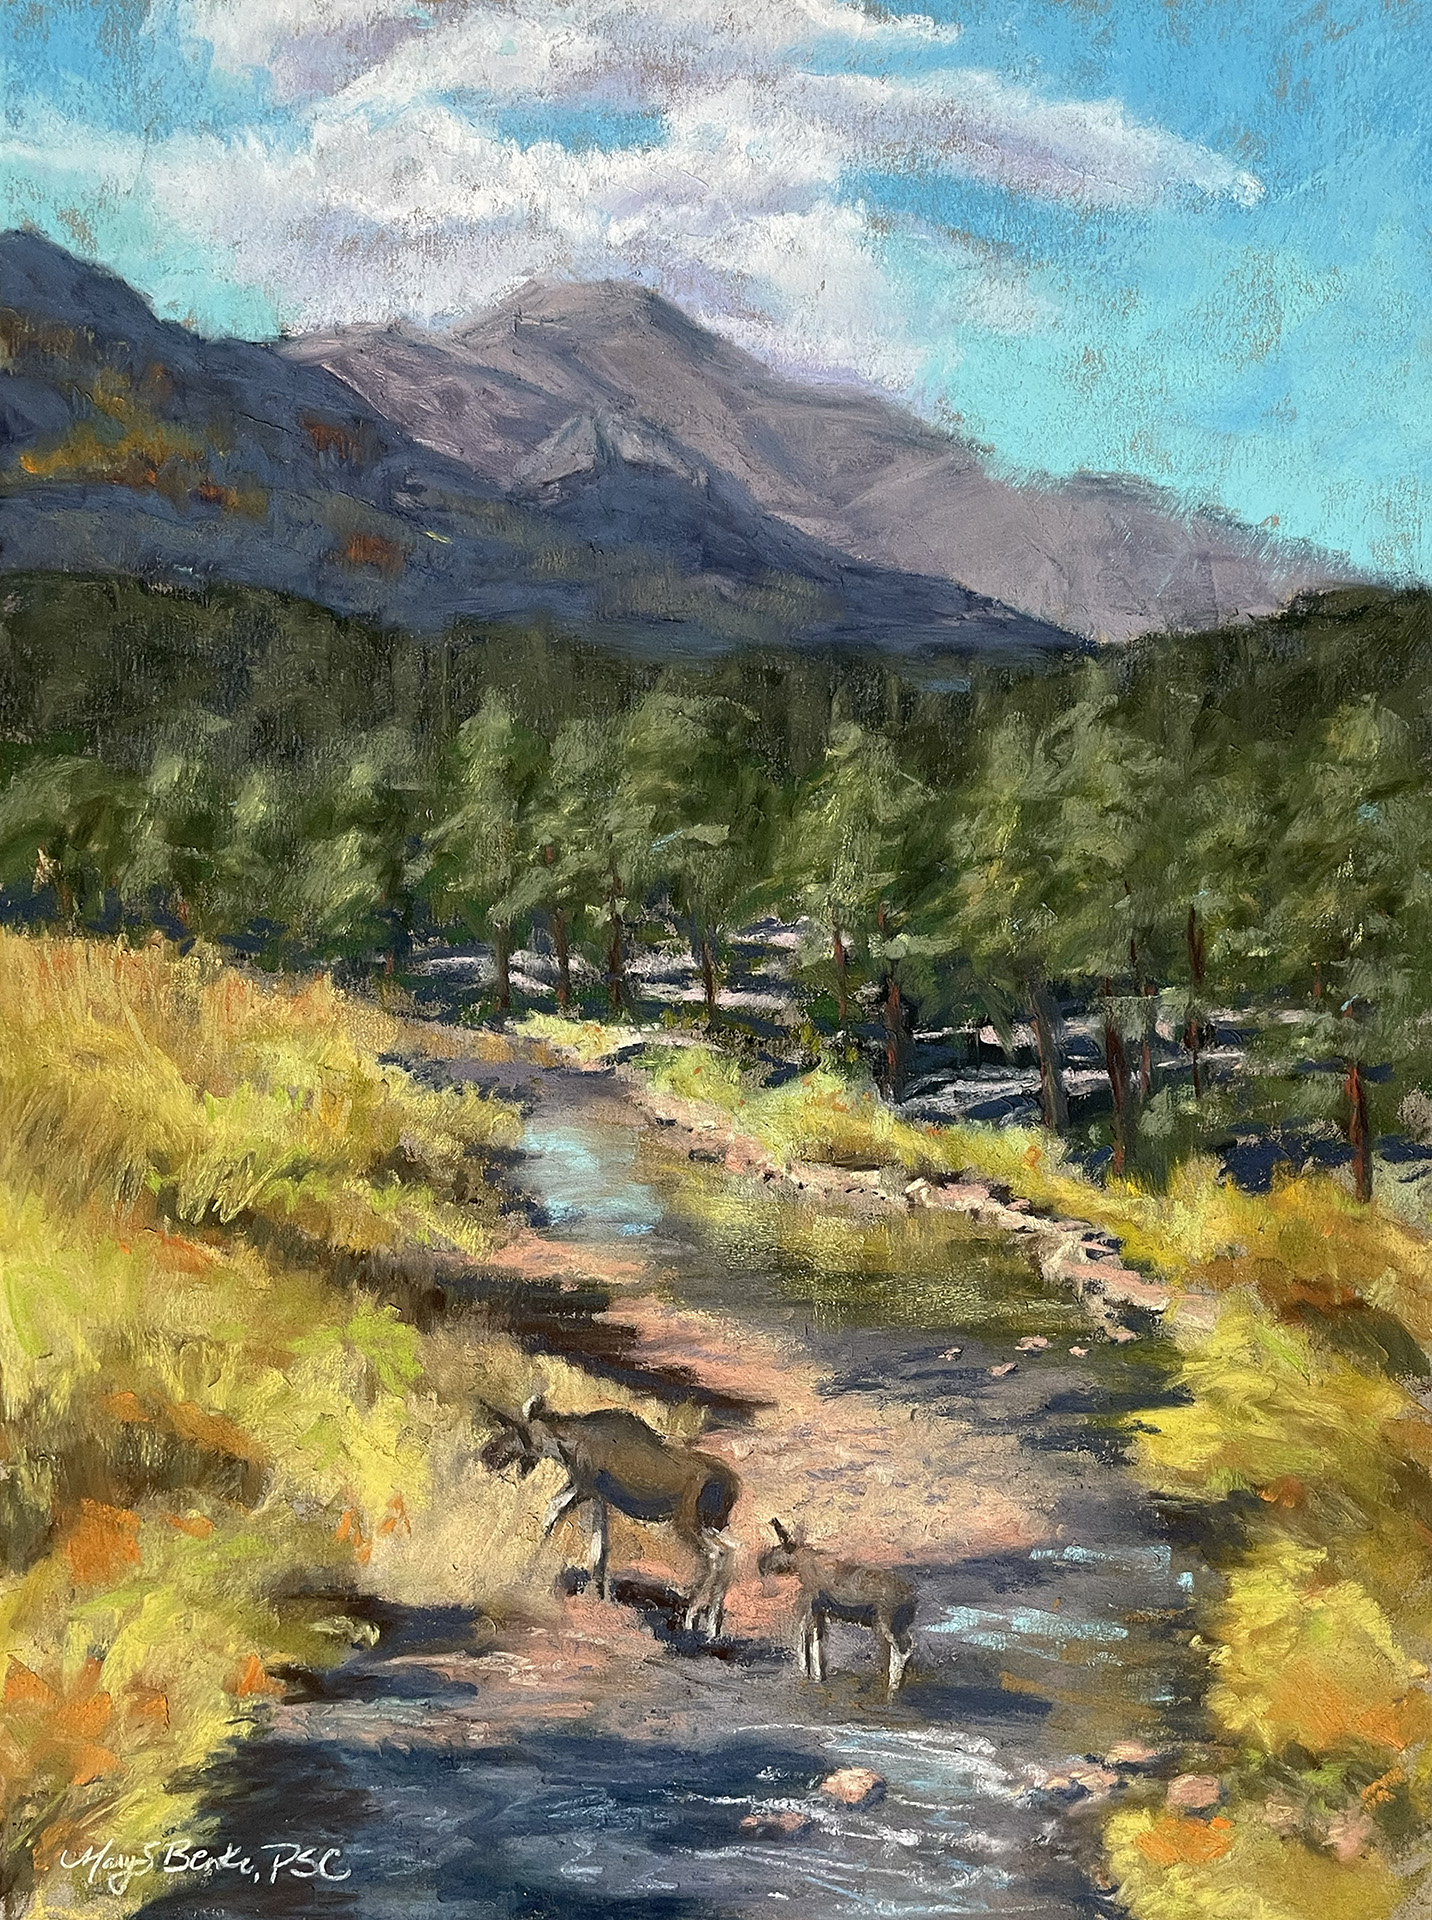 A mama moose escorts her calf across the river in this magical pastel painting featuring changing autumn colors and distant orange and yellow aspen groves in the mountains by Mary Benke